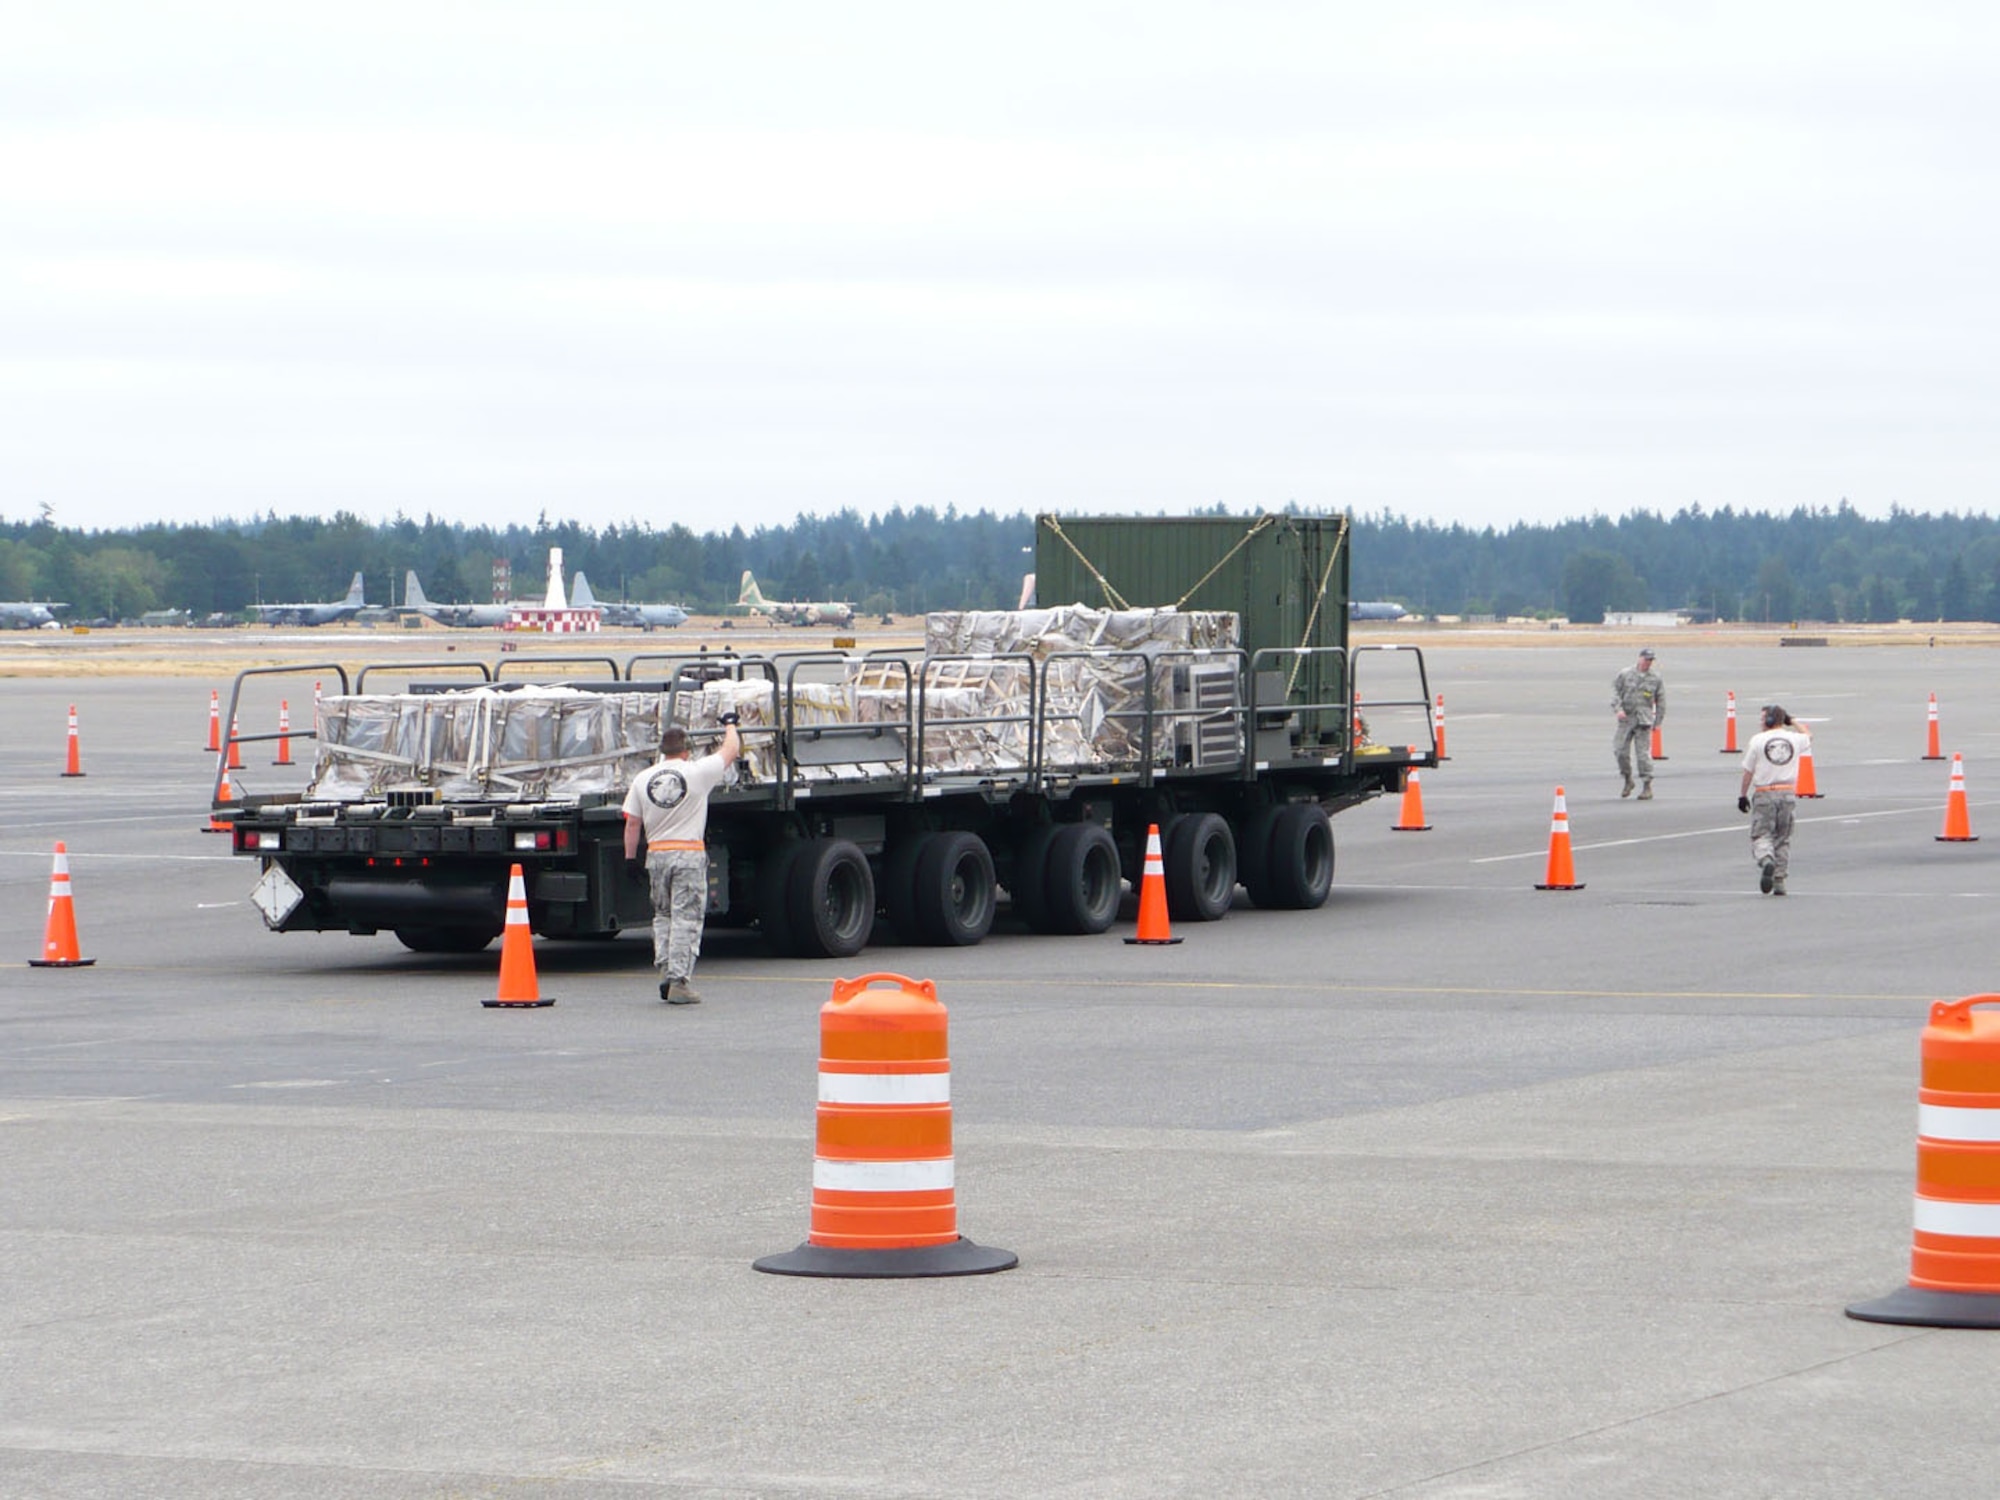 The 435th Contingency Response Group’s Aerial Port team maneuvers a 60K Tunner Loader through an obstacle course as part of the Air Mobility Command Rodeo 2009 competition at McChord Air Force Base, Wash. More than 50 Airmen from Team Ramstein were part of the 2,500 servicemembers from around the Air Force and the globe participating in the rodeo. The competition, which went from Jul 19 to 24, is a bi-annual mobility readiness exercises that brings teams together to compete in more than 50 judged events spanning the categories of aerial port, aeromedical evacuation, aircrew, fit to fight, maintenance and security forces.  (Courtesy photo)